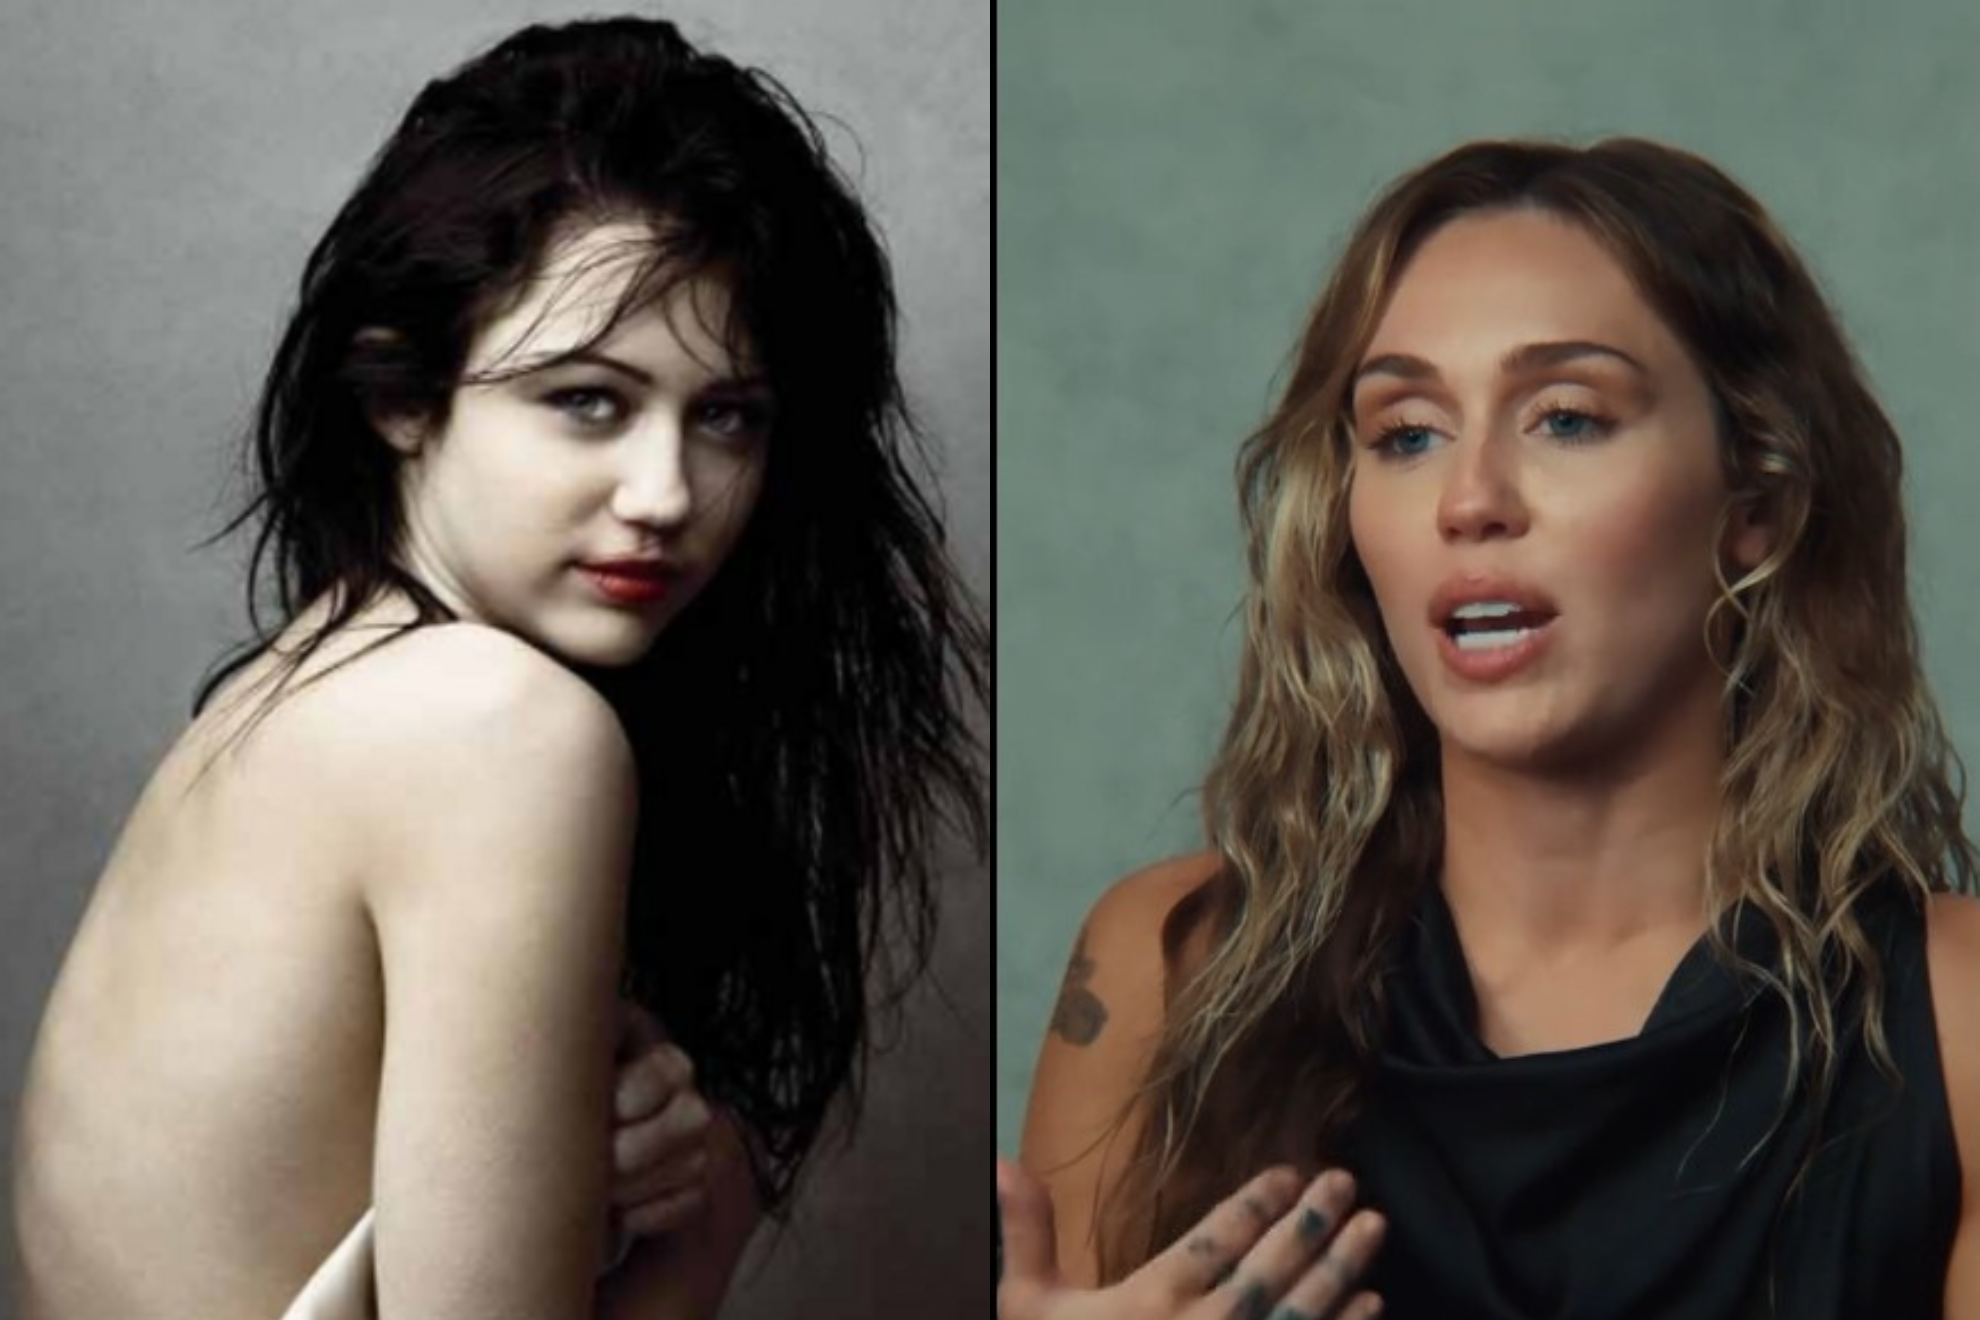 Noah Cyrus was behind the lens of Mileys most controversial picture to that date